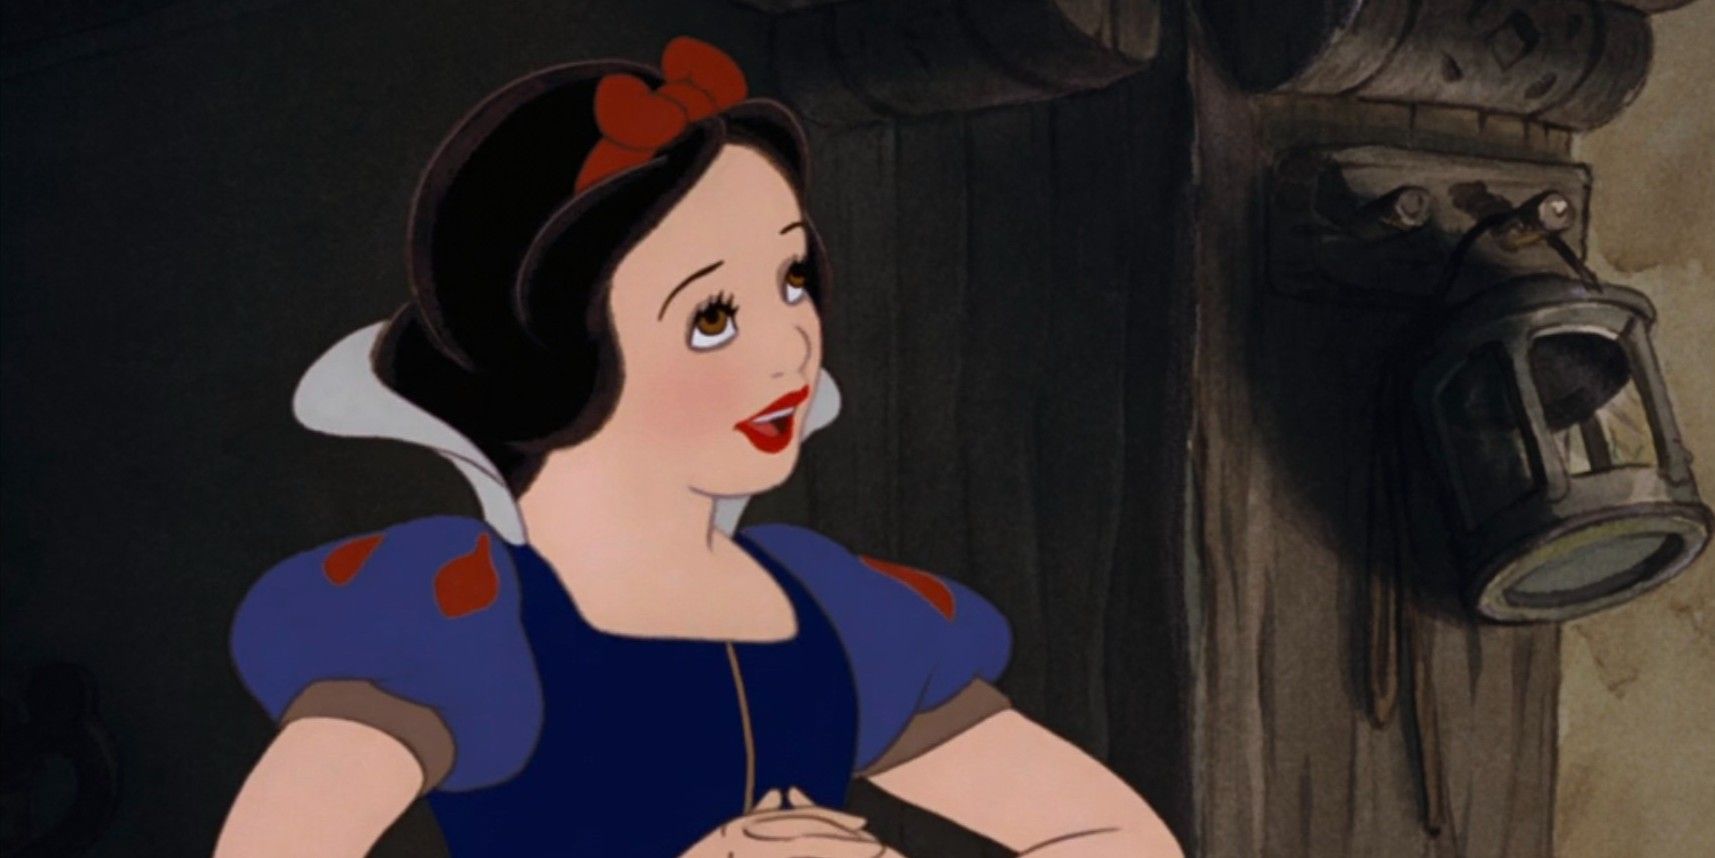 Disney's Snow White clasping hands together